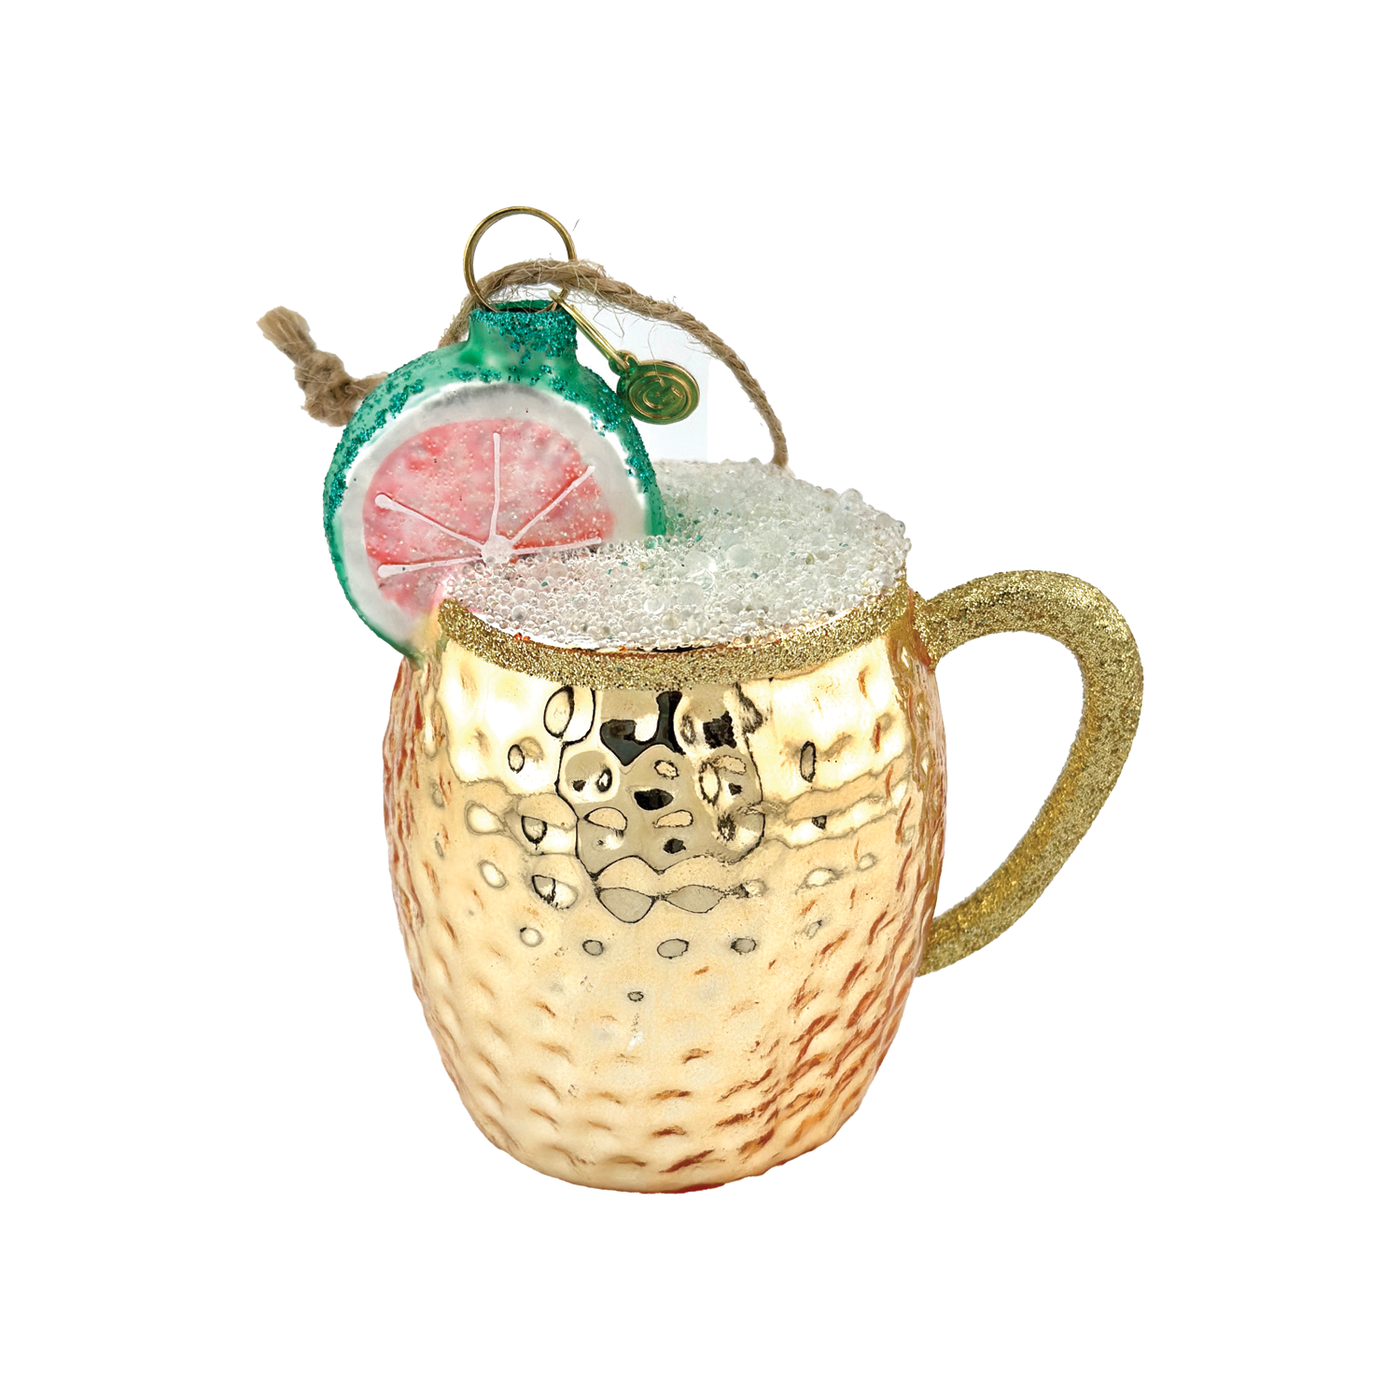 Moscow Mule Ornament - Teal & Gold